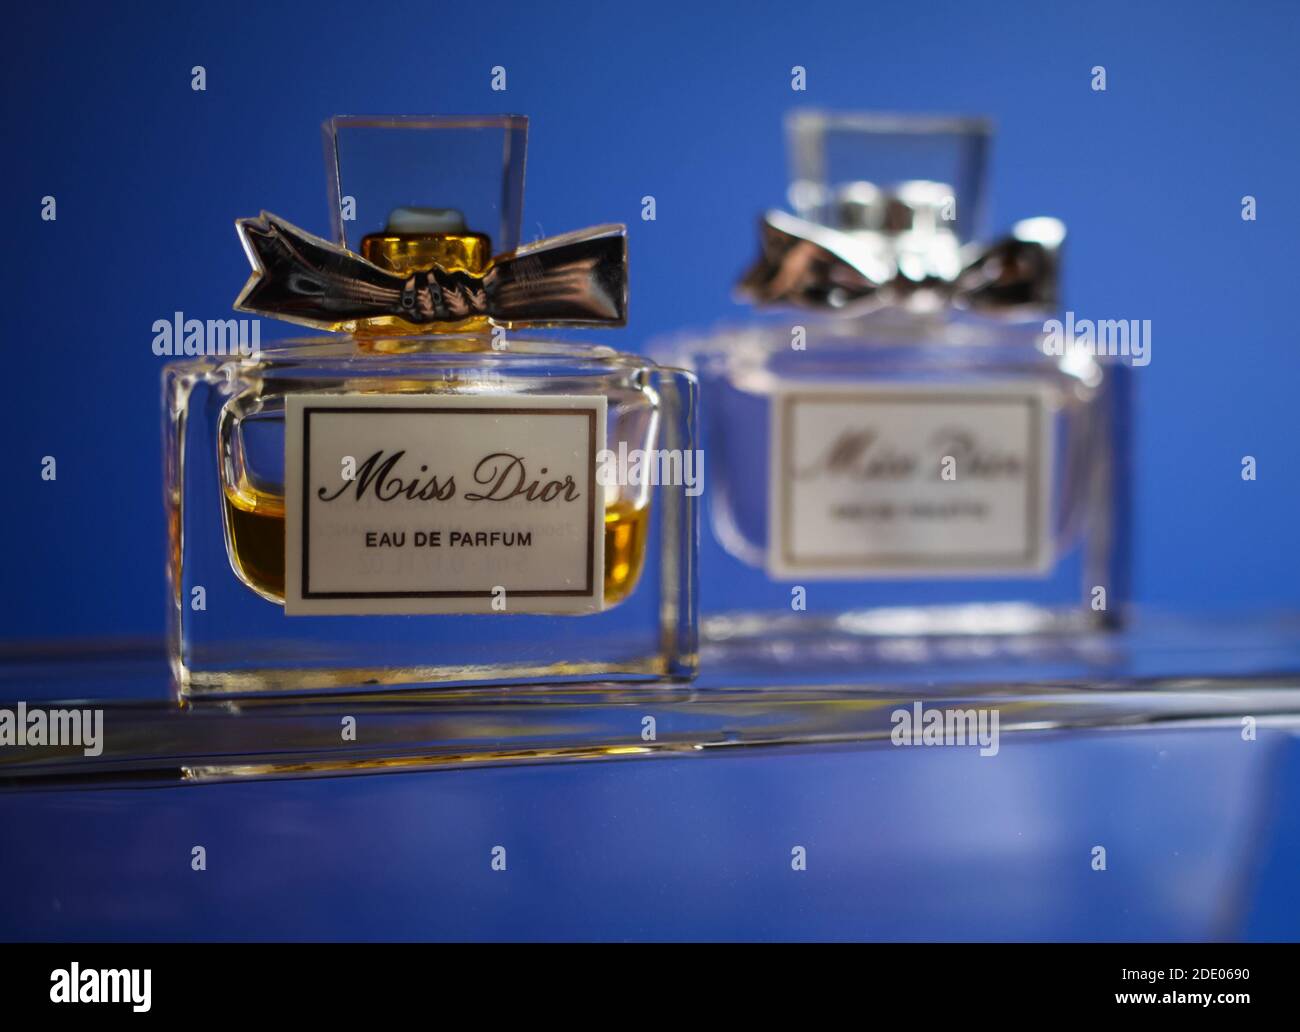 Miss Dior Beauty Salon picturePerfume picture made with